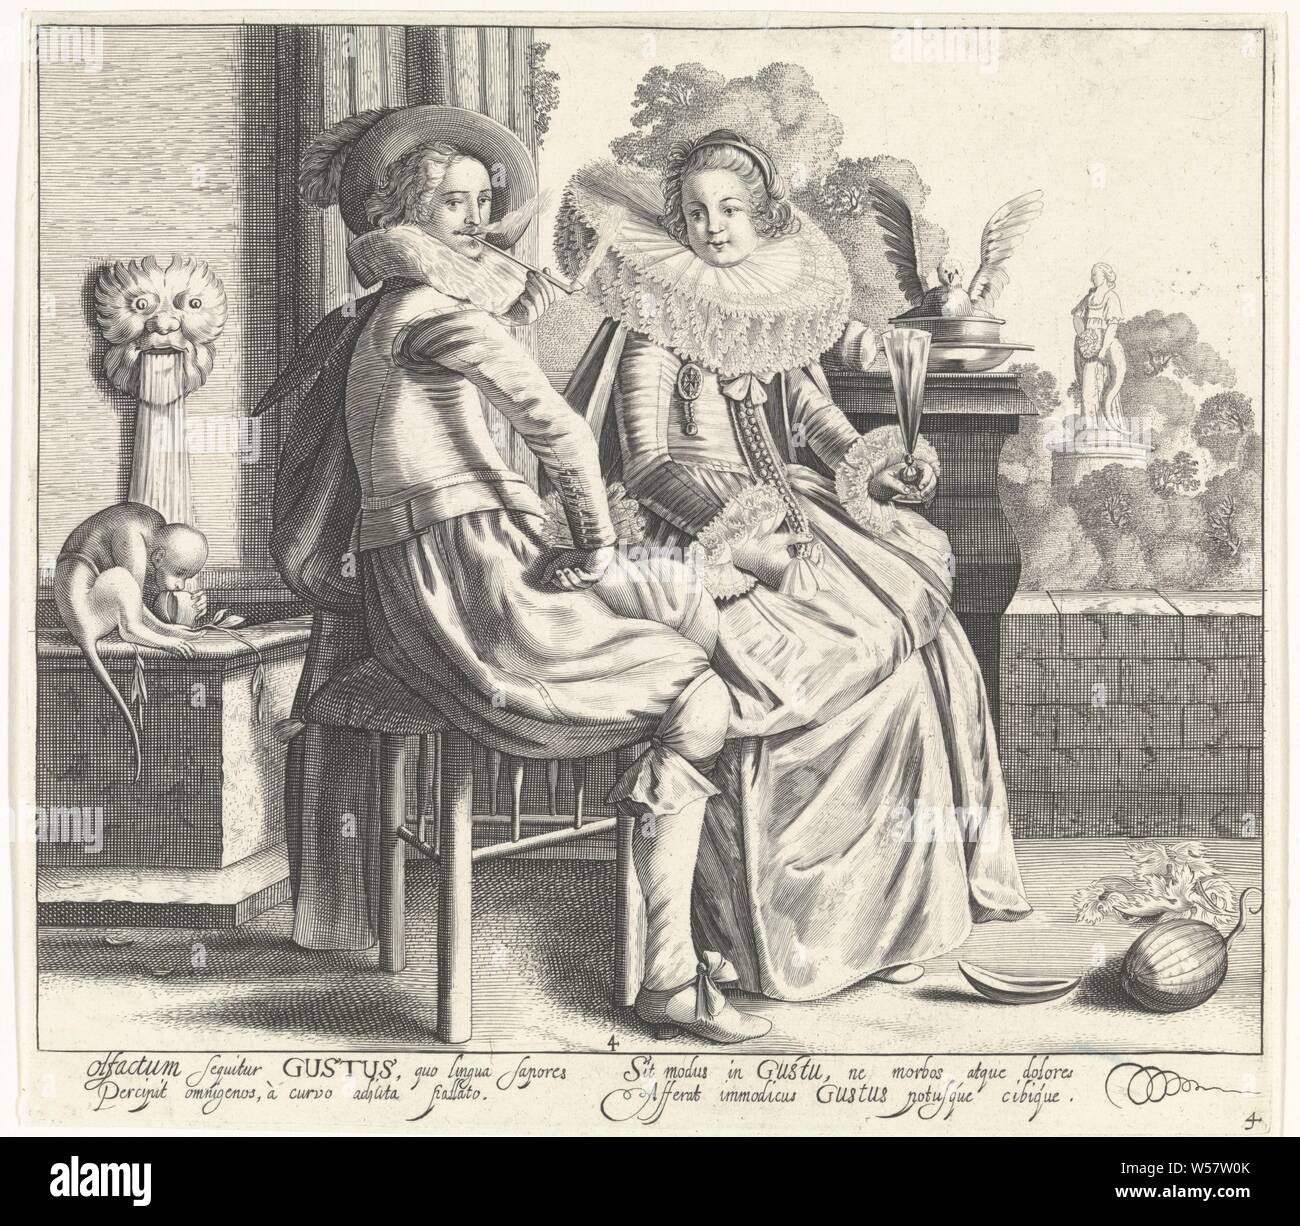 Gustus / De Smaak Five senses (series title), On a platform - overlooking a garden - sits an elegant couple, dressed in the fashion of ca. 1625-'30. The lady has a glass in the left hand and wears a frock with a very wide millstone collar. There is a melon on the floor in front of the couple and a monkey sitting by the fountain holding a fruit by its snout. Below the image two columns with Latin text. The print is part of a series with prints on the five senses, clothes, costume (men's clothes), costume (women's clothes), neck-gear, clothing (with NAME) (women's clothes), clothing (with NAME Stock Photo